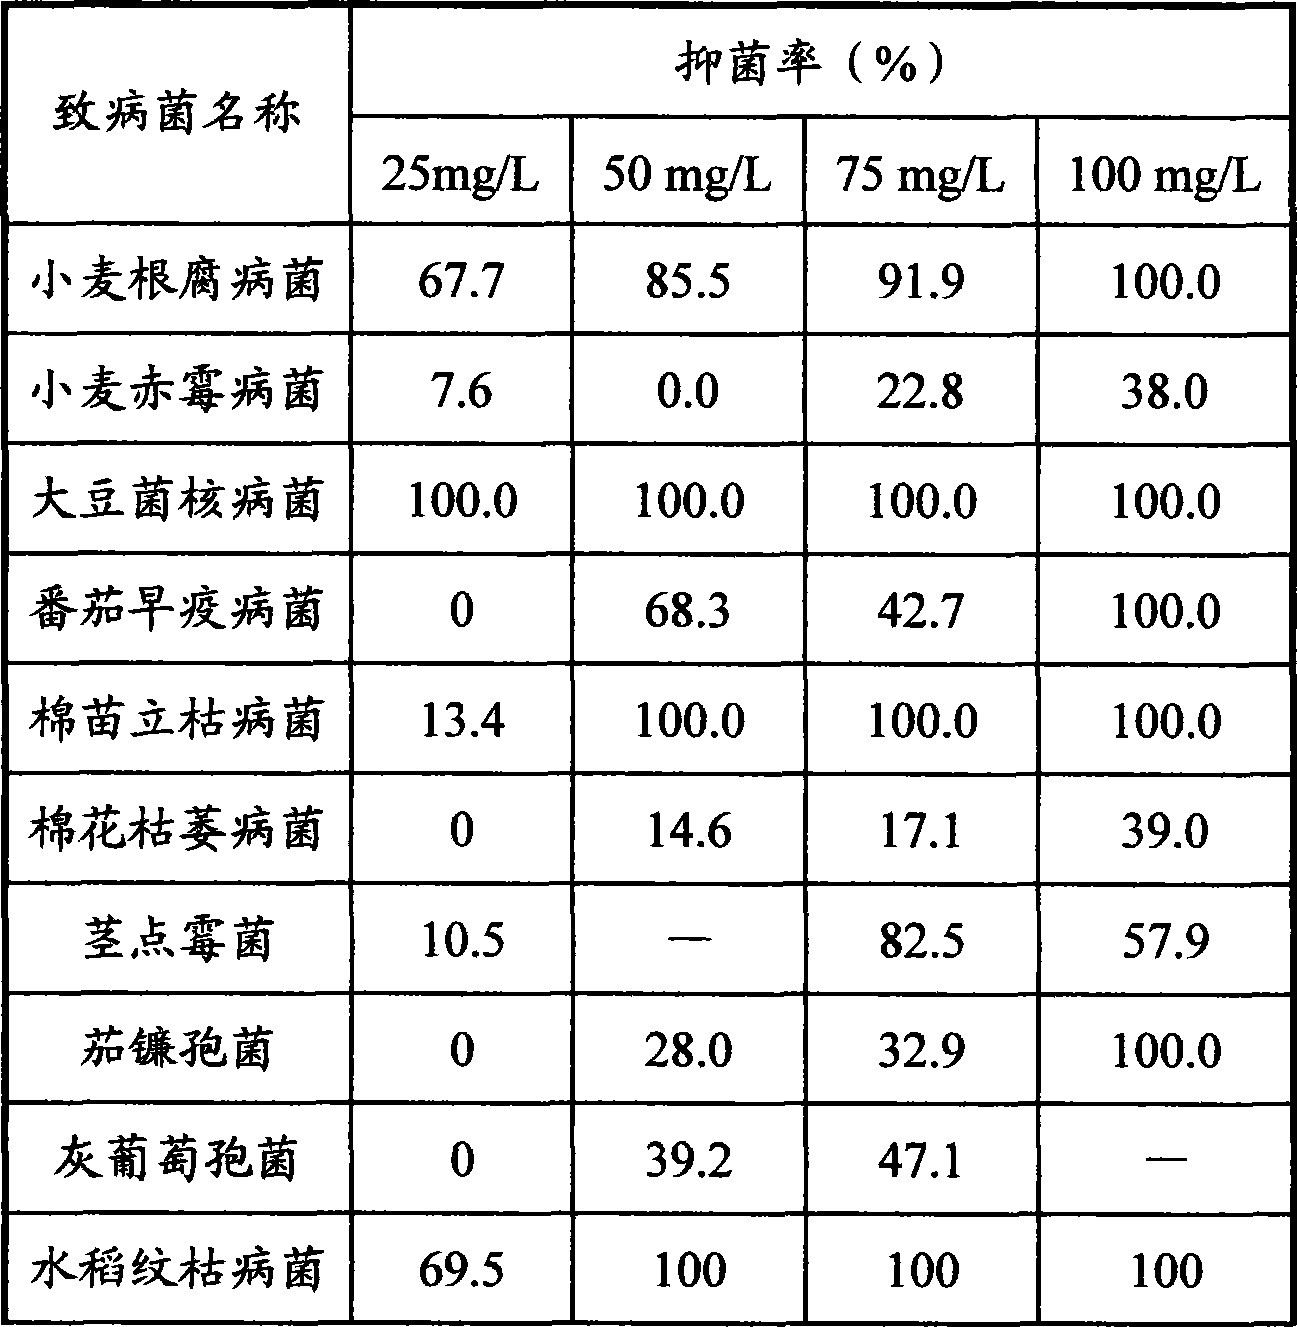 Use of hinokitiol metal compound